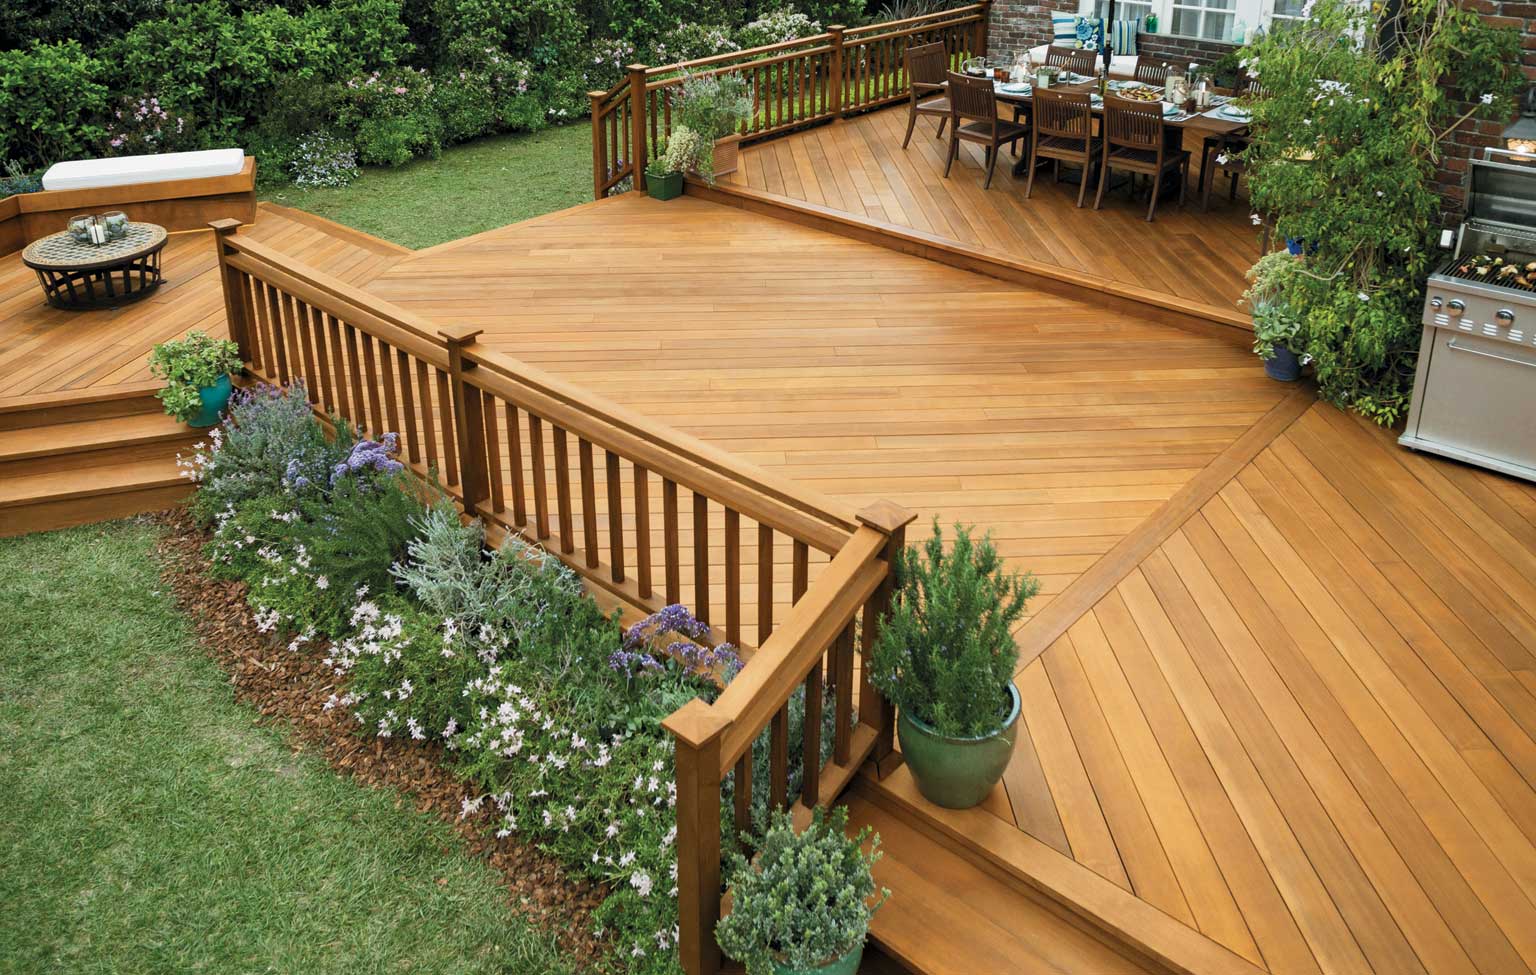 Deck made of wood